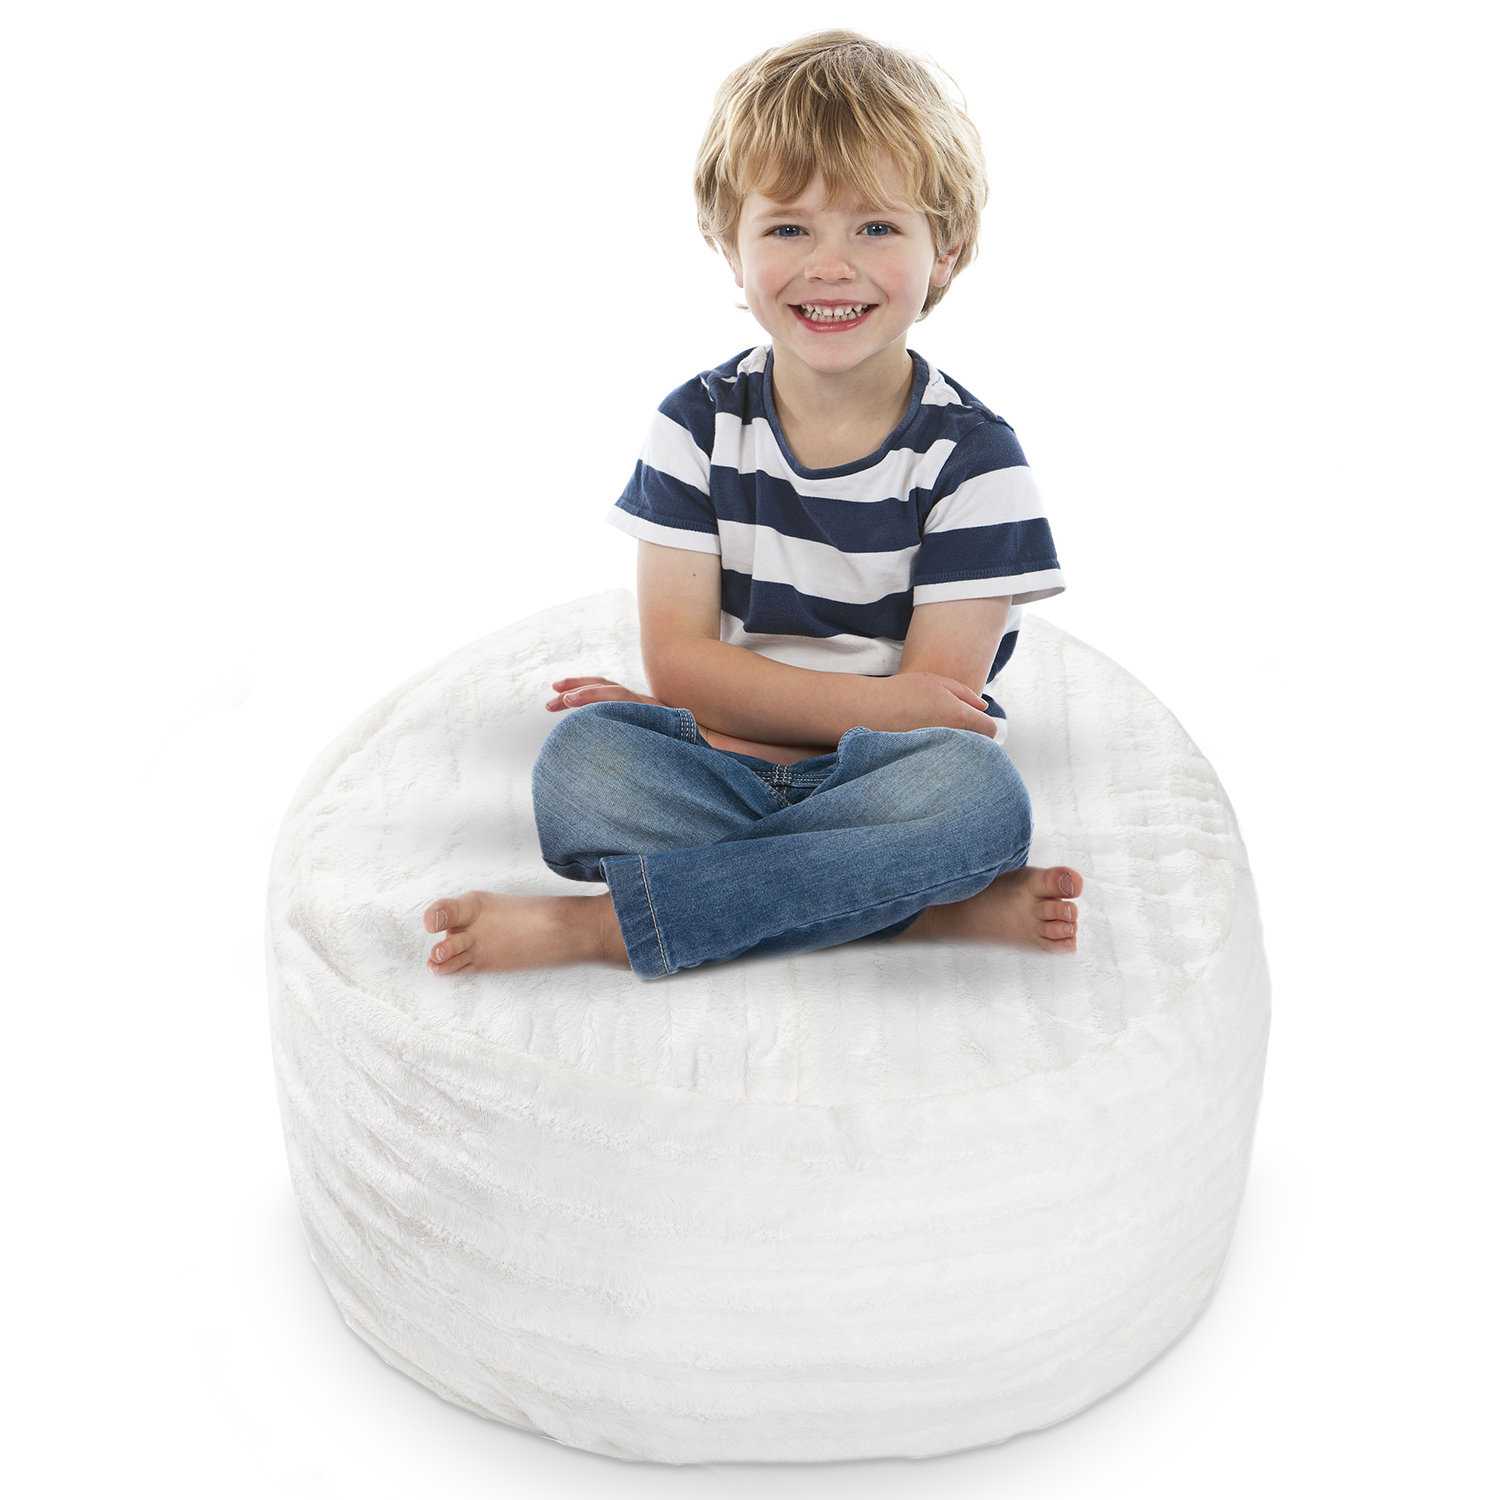 Extra Large Bean Bag Cover, Childproof Closure: Yes, Removable Cover: Yes